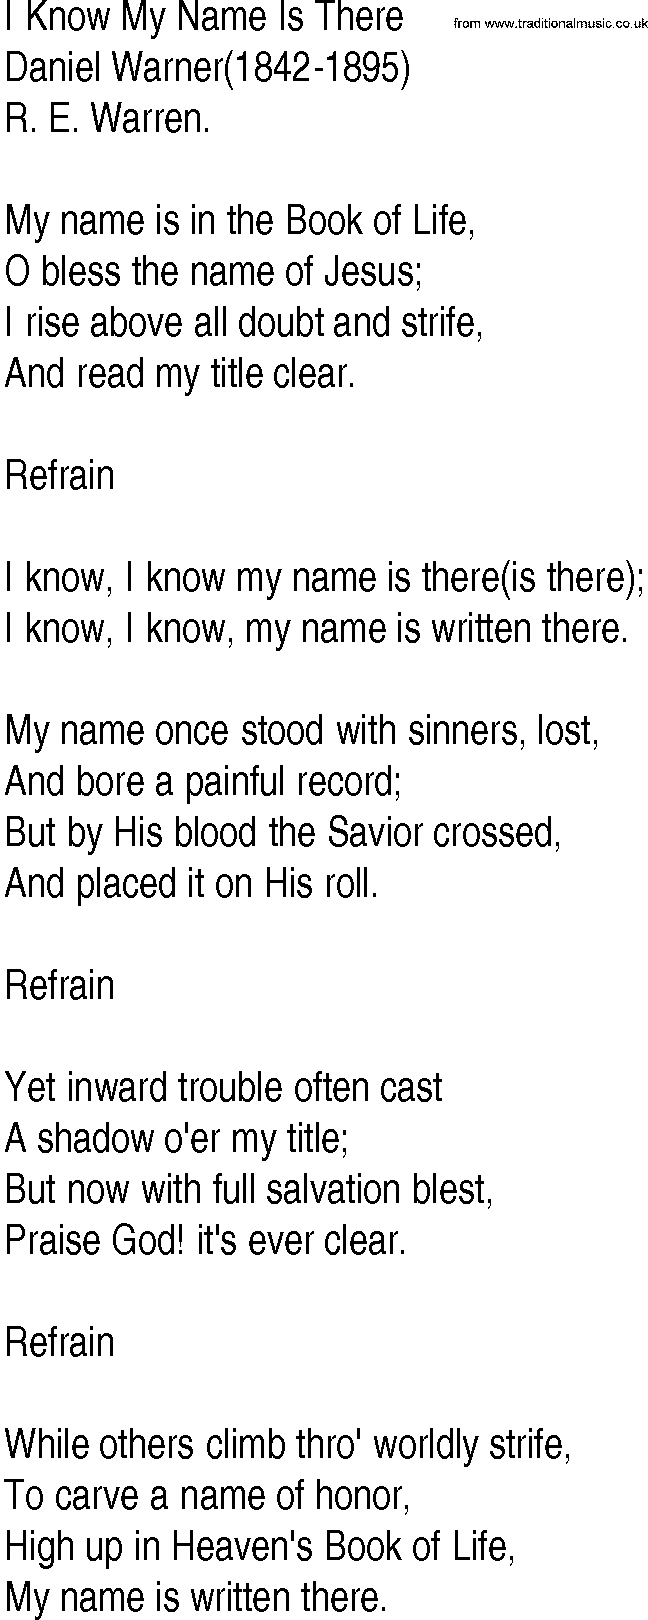 Hymn and Gospel Song: I Know My Name Is There by Daniel Warner lyrics